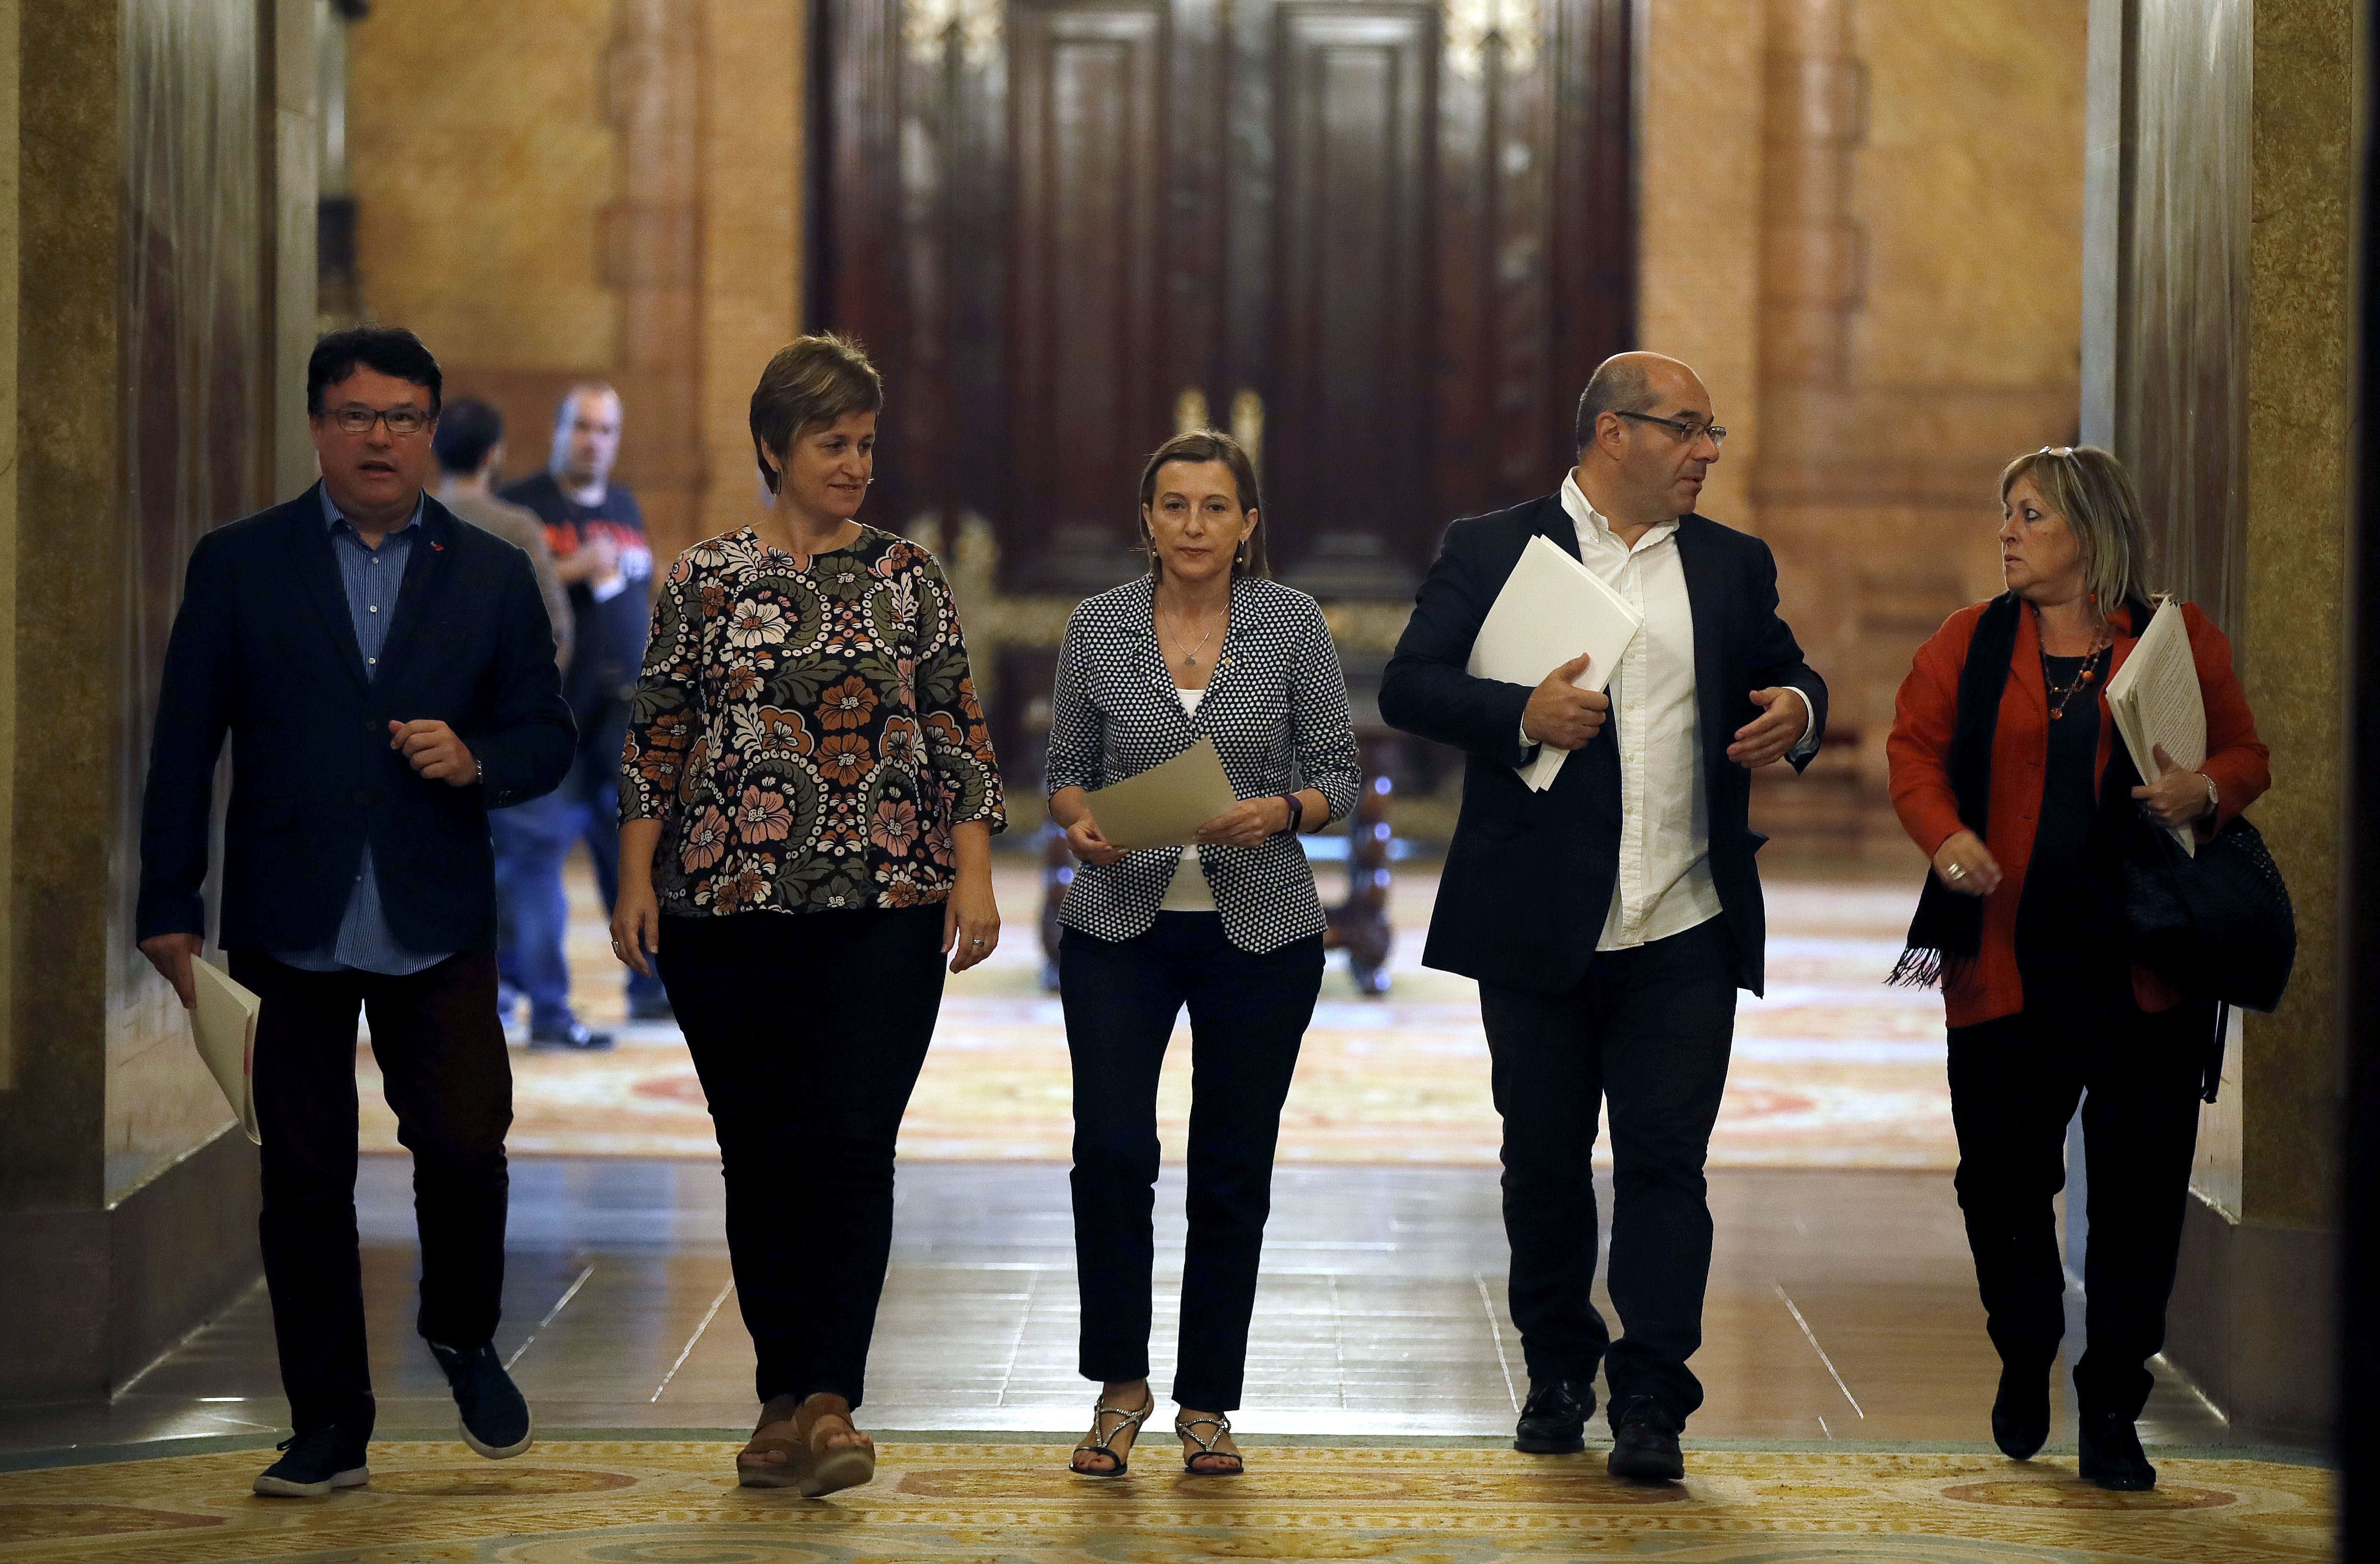 Catalan Parliament Board members: "They're hoping to finish us off"